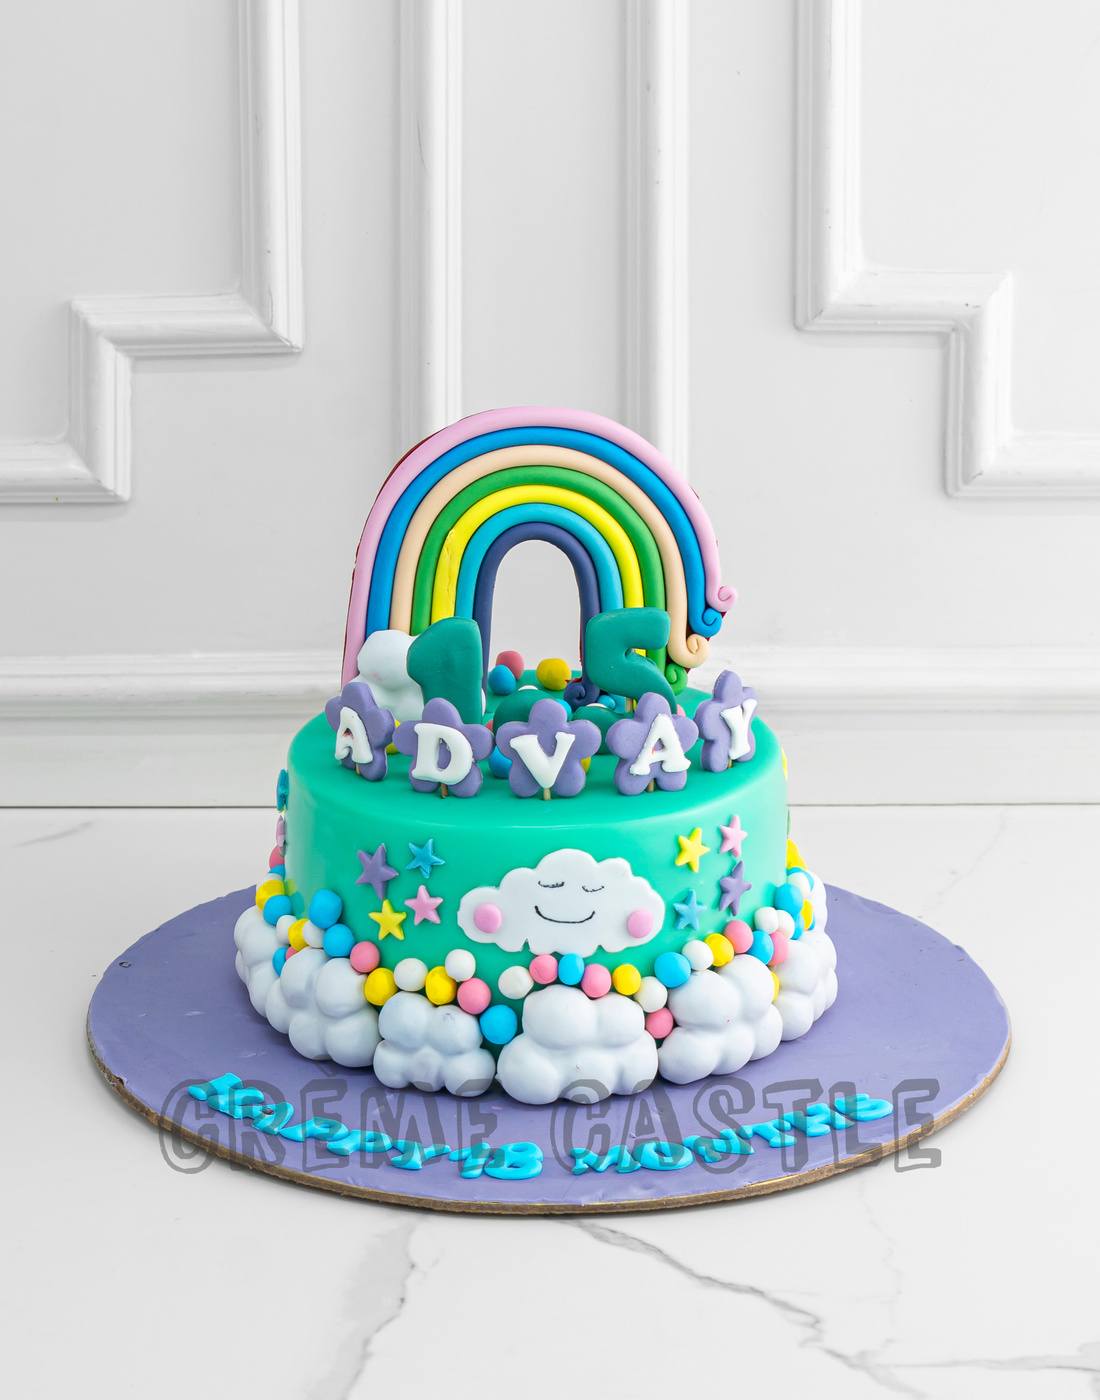 Moon, Stars, and Clouds cake with gum paste Teddies | Flickr